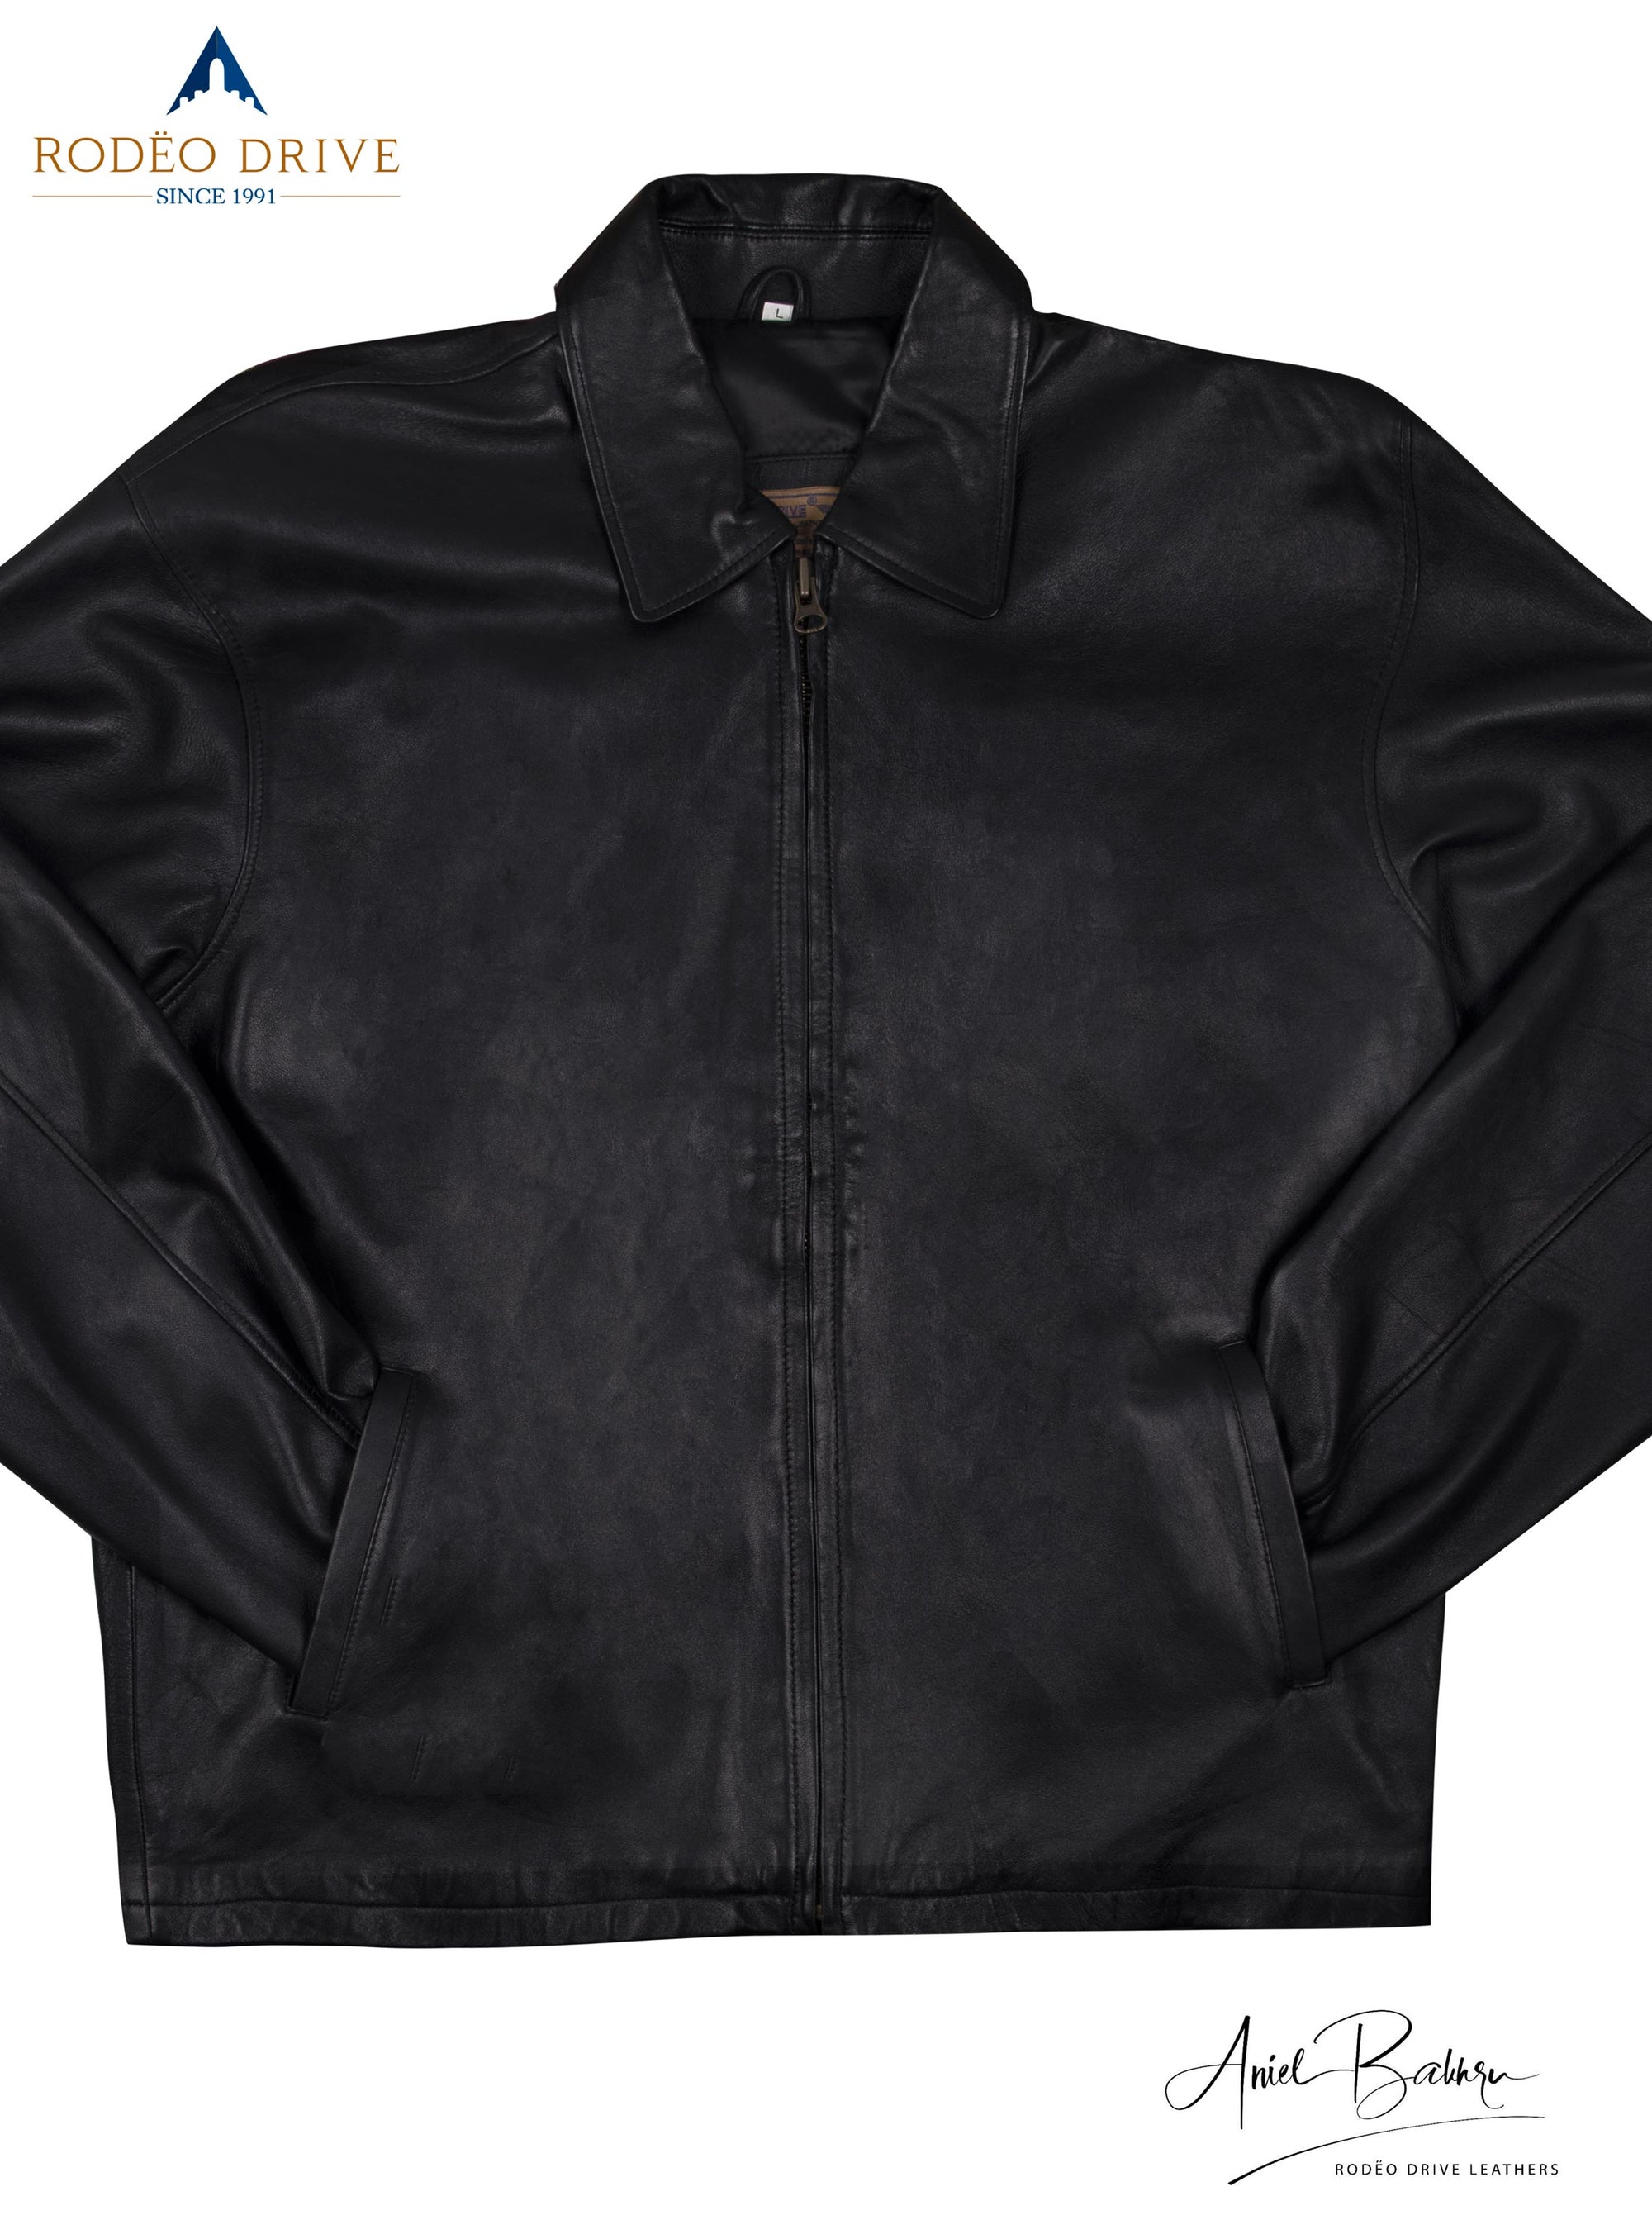 Close entire image of black leather jacket image. hands of it are tucked in side slit pockets